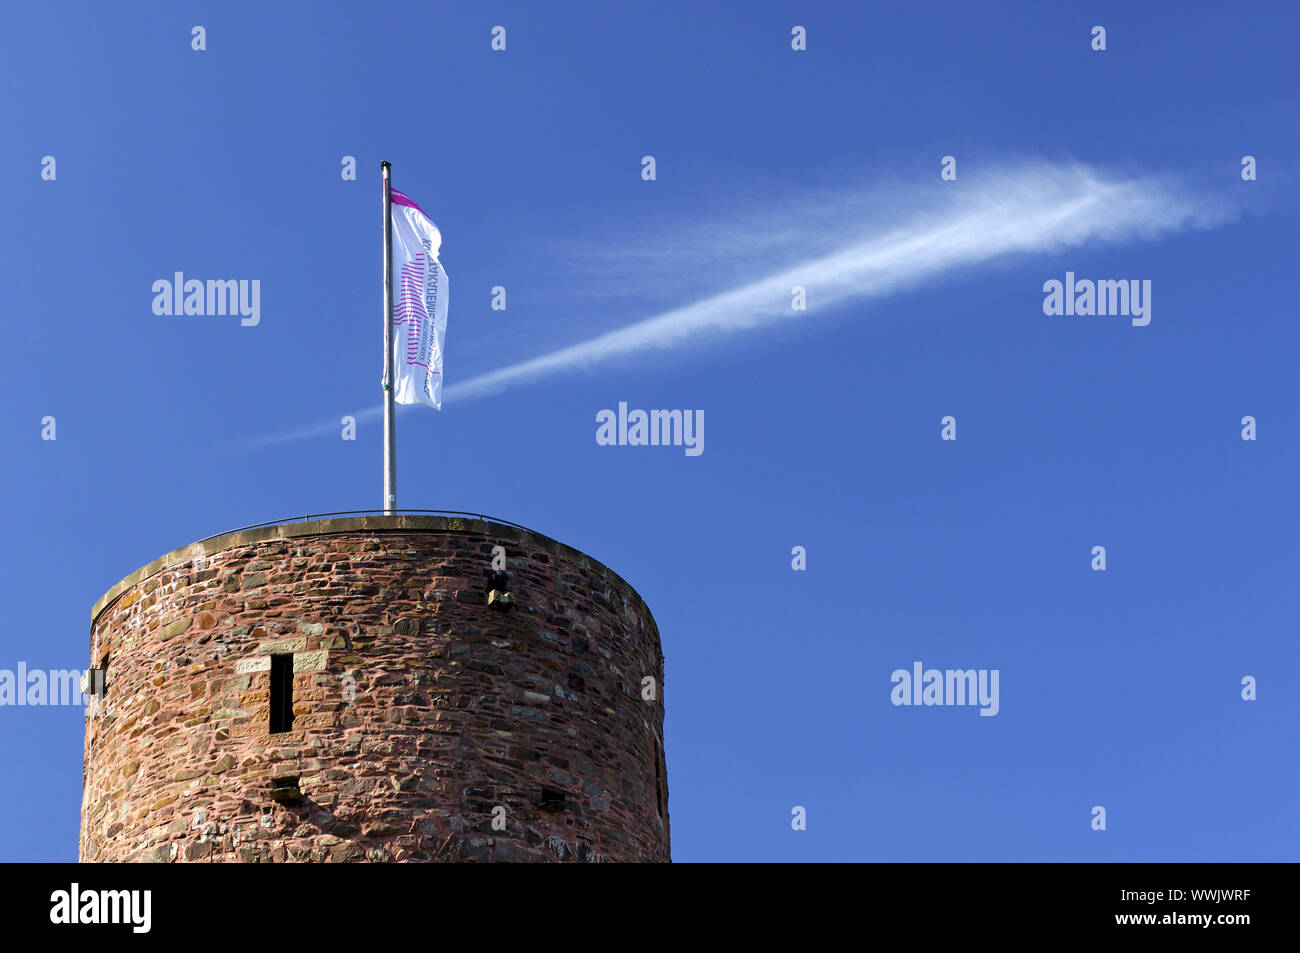 The flag of the International Academy of Fine Arts Heimbach is flying over the keep of the castle Hengebach in Heimbach. Stock Photo